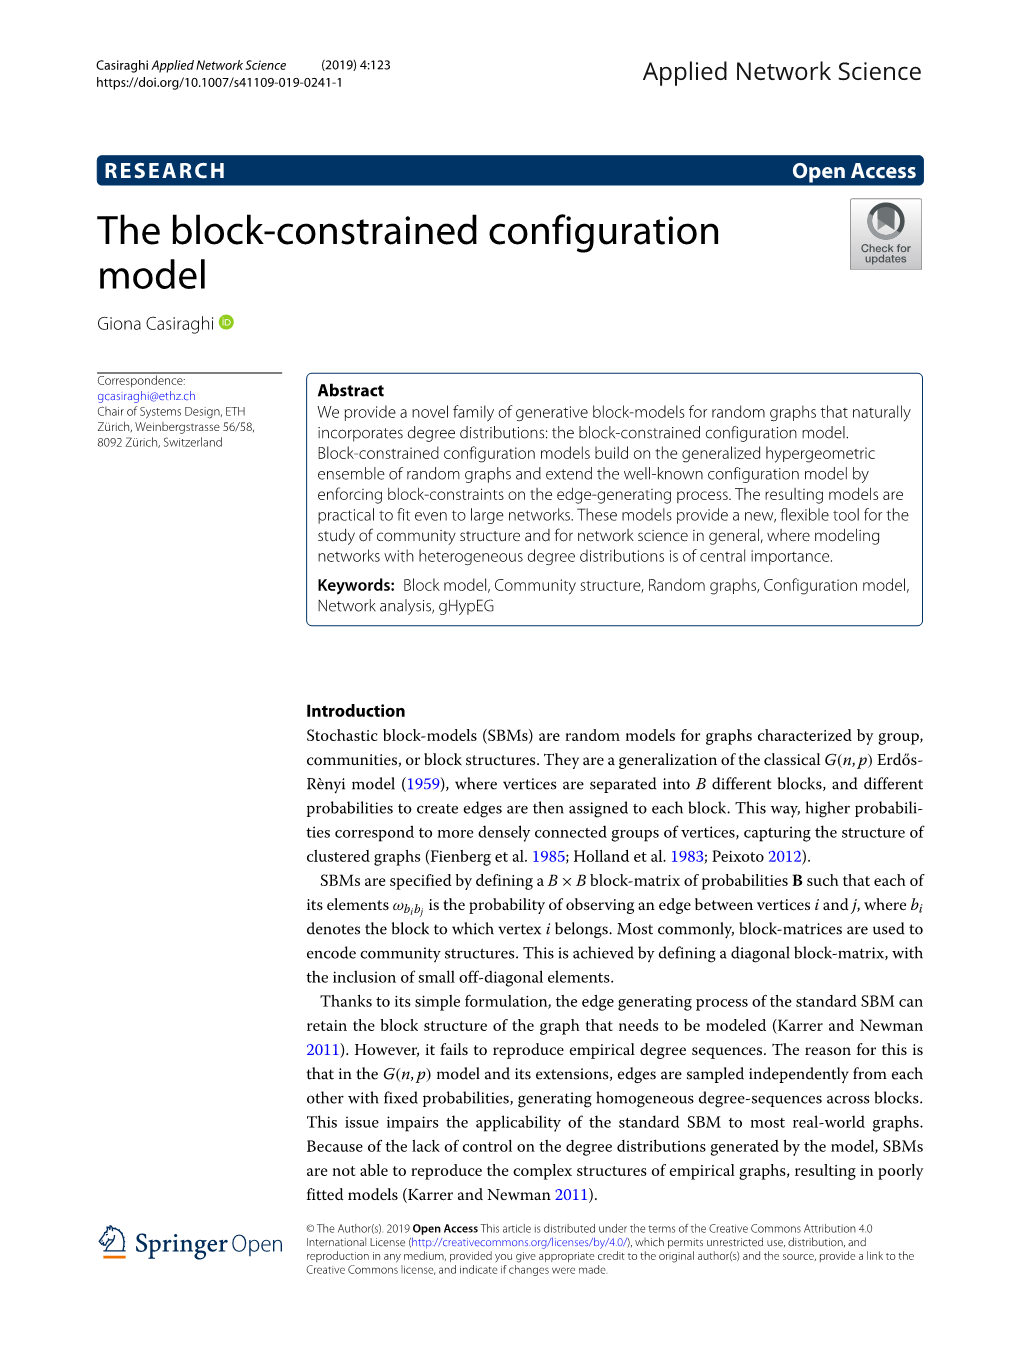 The Block-Constrained Configuration Model Giona Casiraghi